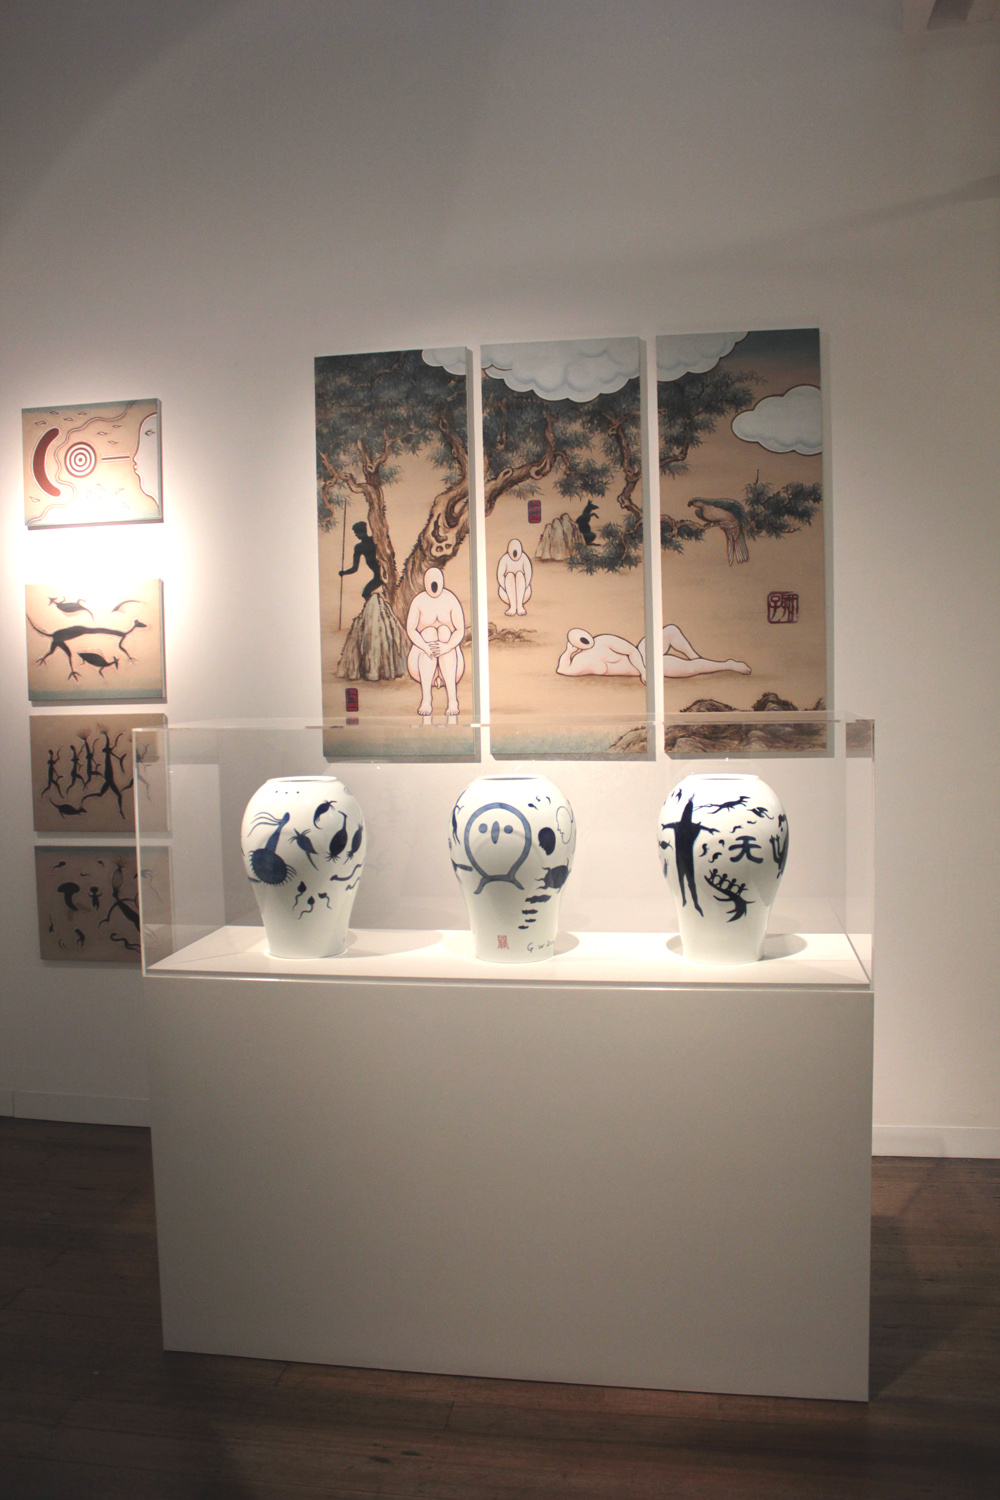   GUAN WEI     Key Works , Exhibition View, 2015  